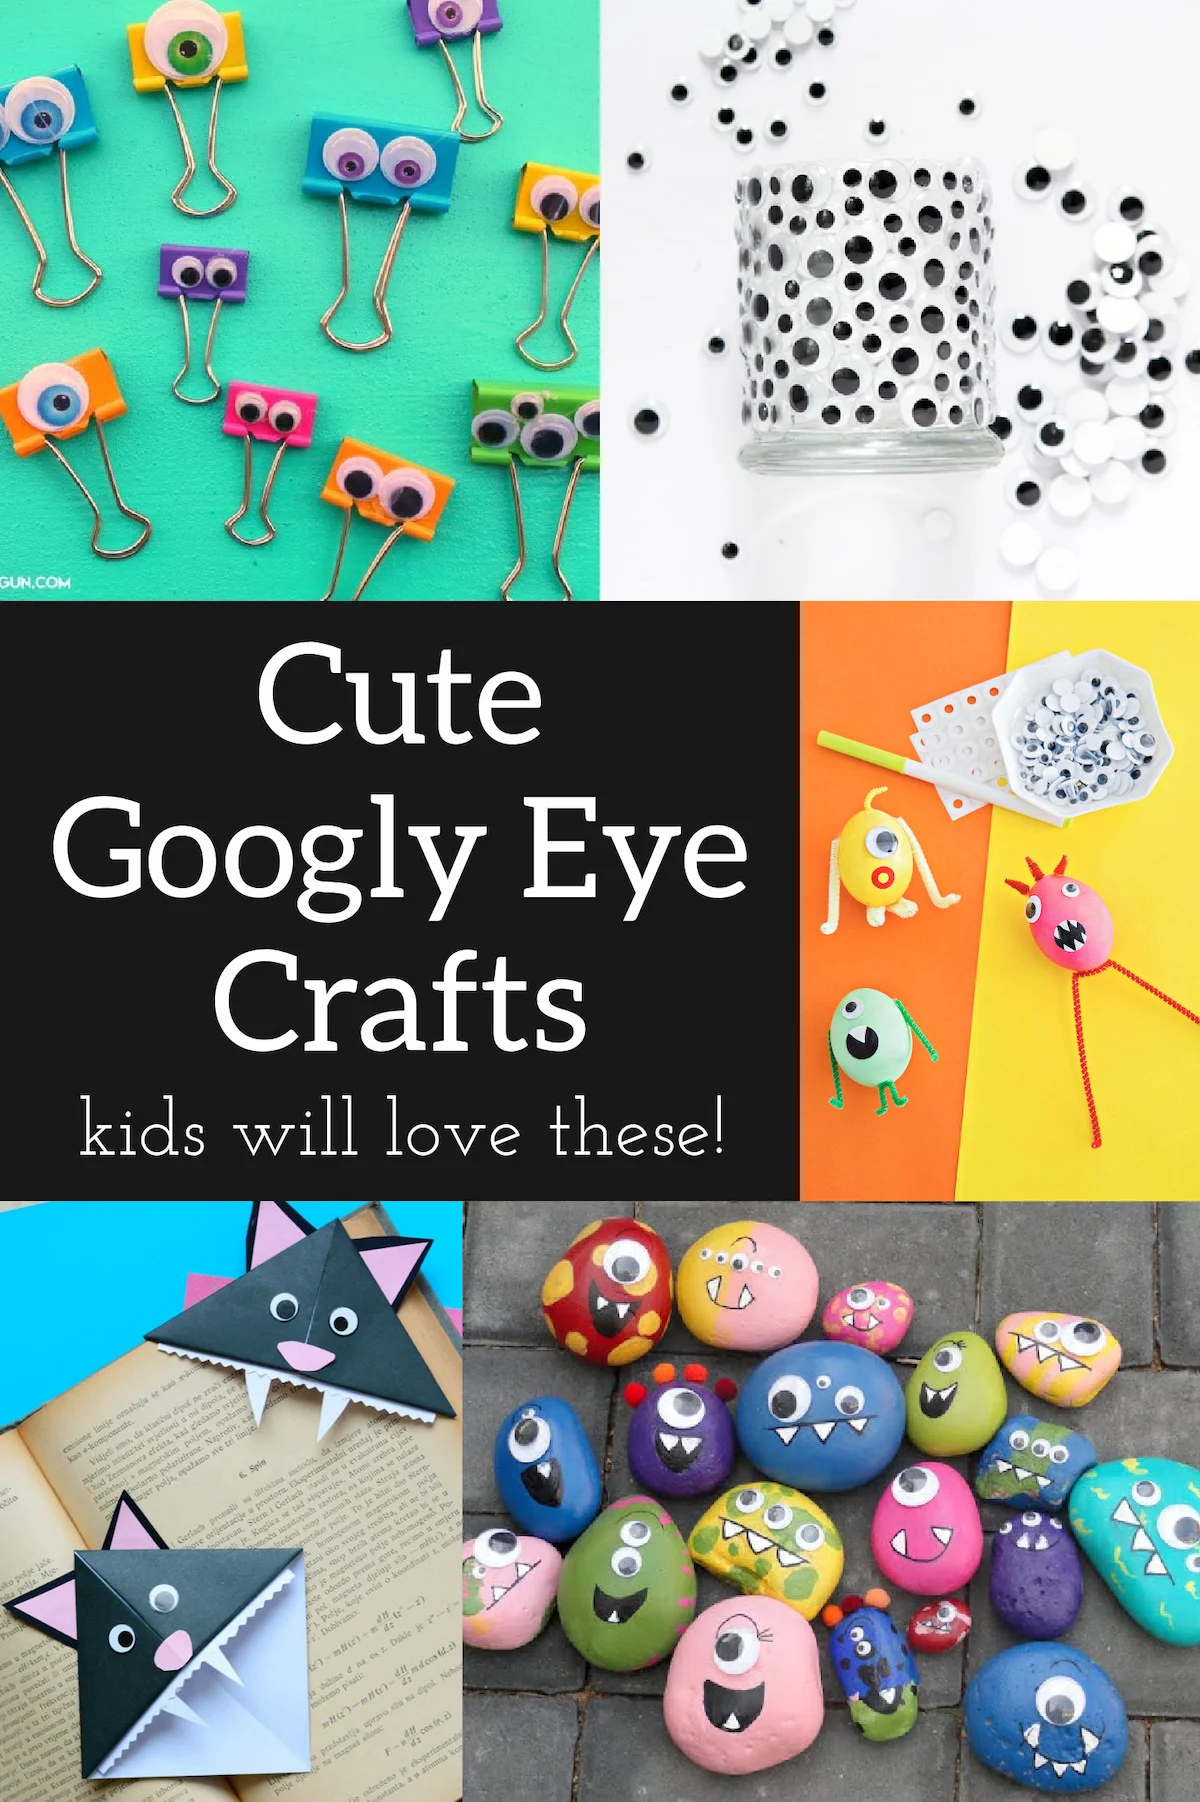 How To Make Googly Eyes in 4 Ways at Home, DIY Crafts Tutorial